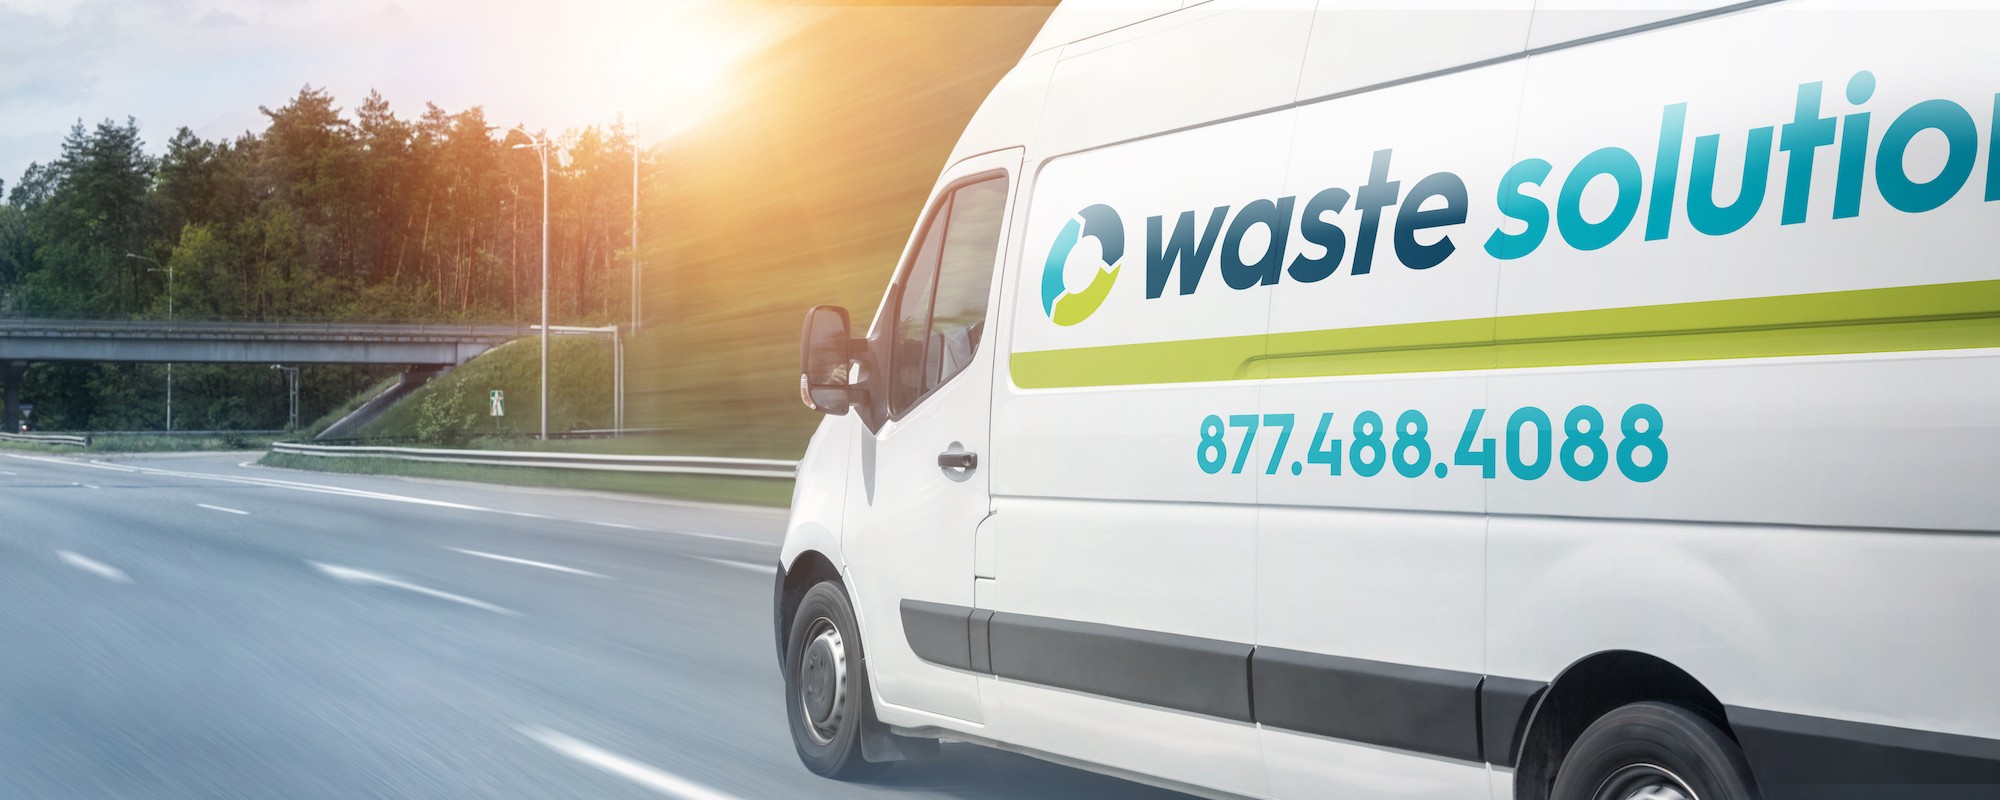 waste solutions branded sprinter van driving down road with logo and phone number visible 877 488 4088